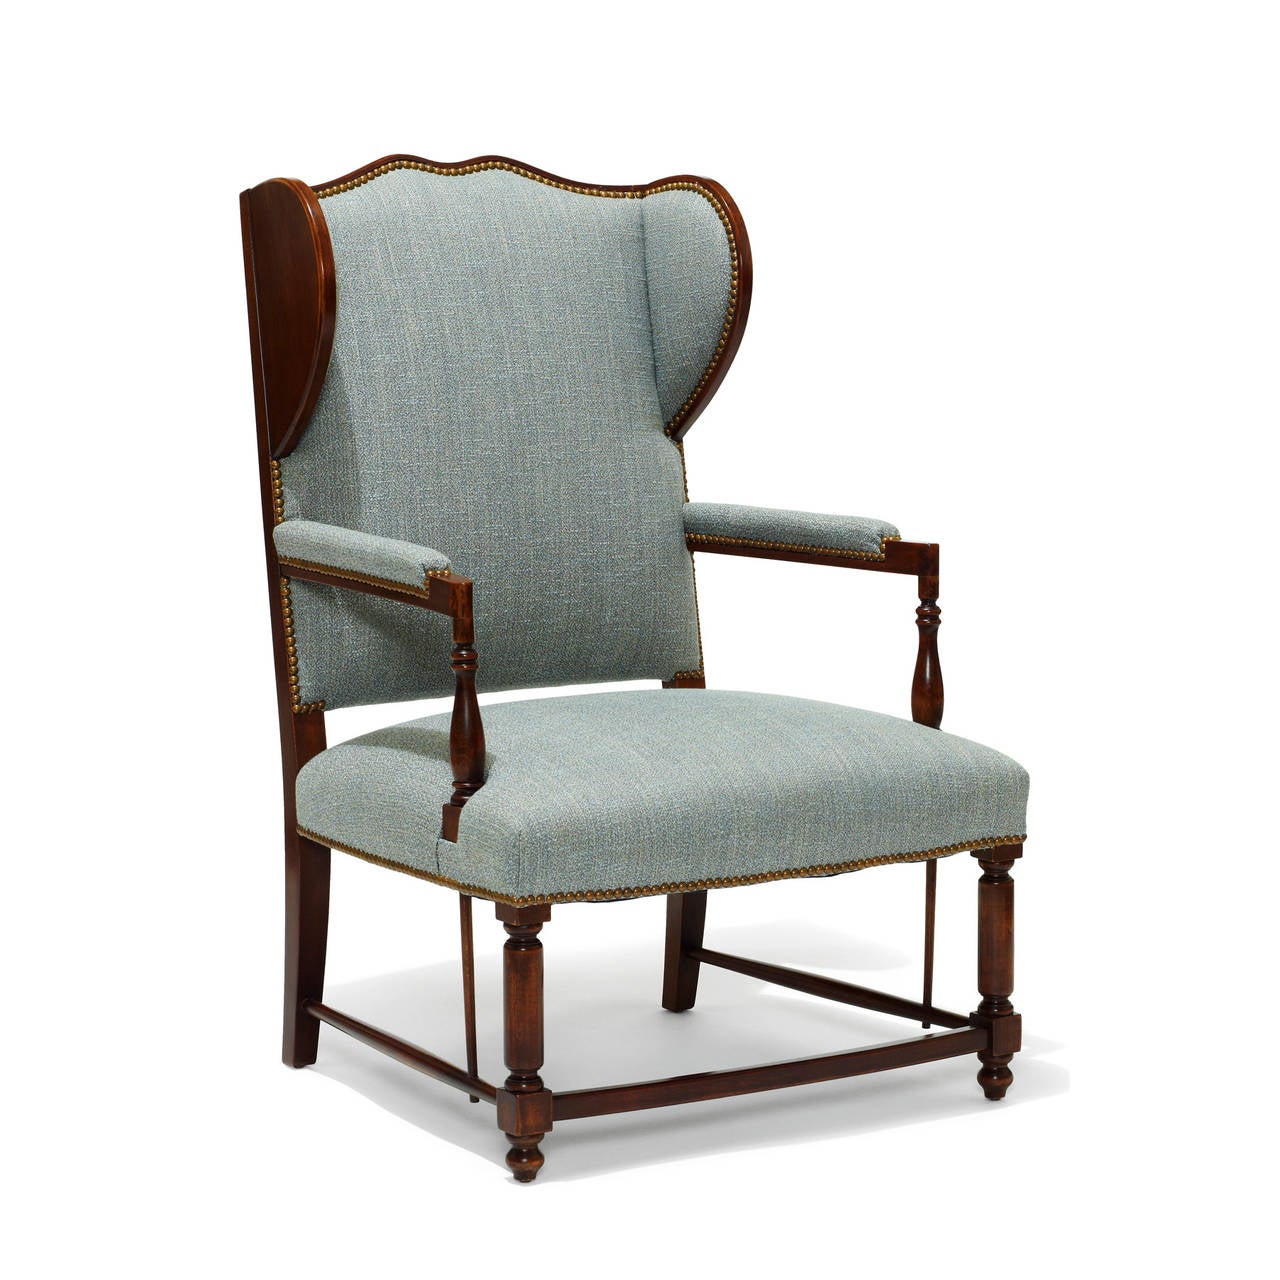 Handsome pair of 1920s Swedish wing-backed armchairs inspired by a local vernacular form, edited by an architect or designer to suit a 20th century interior. The frame, legs, and stretchers are in birch, and the upholstery is a blue/ivory silk/linen